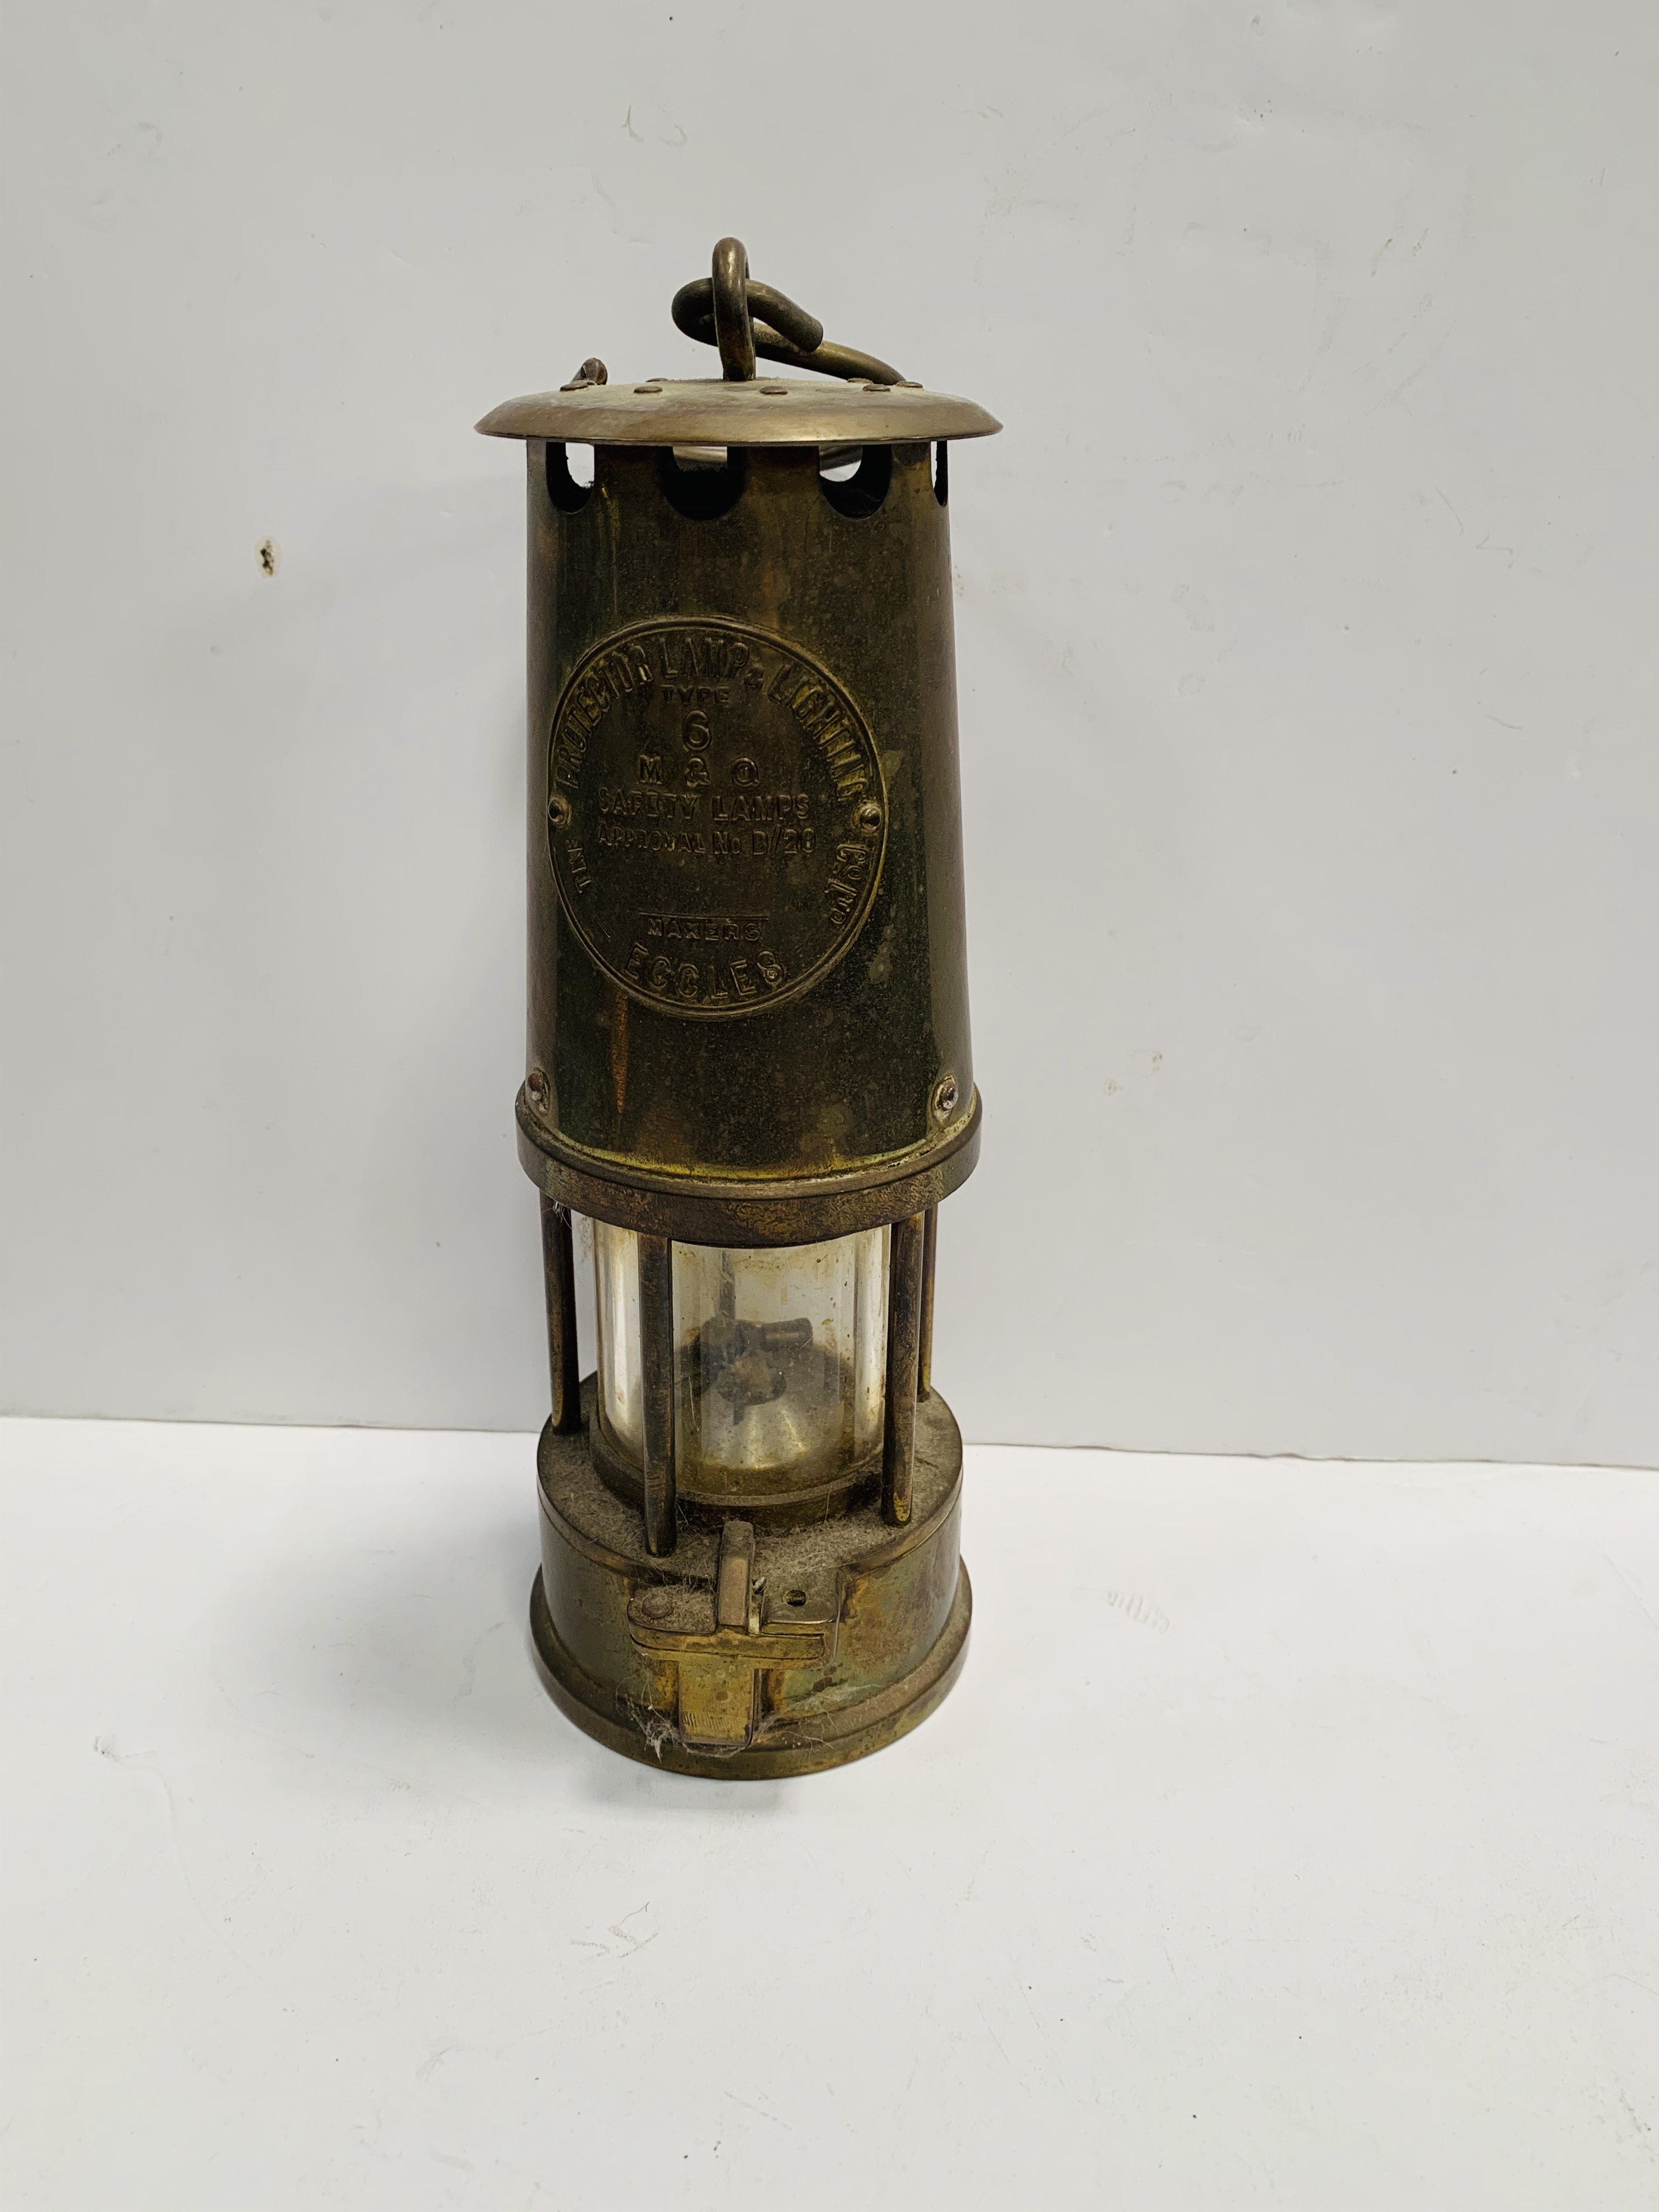 Protector Lamp & Lighting Company of Eccles brass & steel miner's safety lamp, Type 6 M&Q.